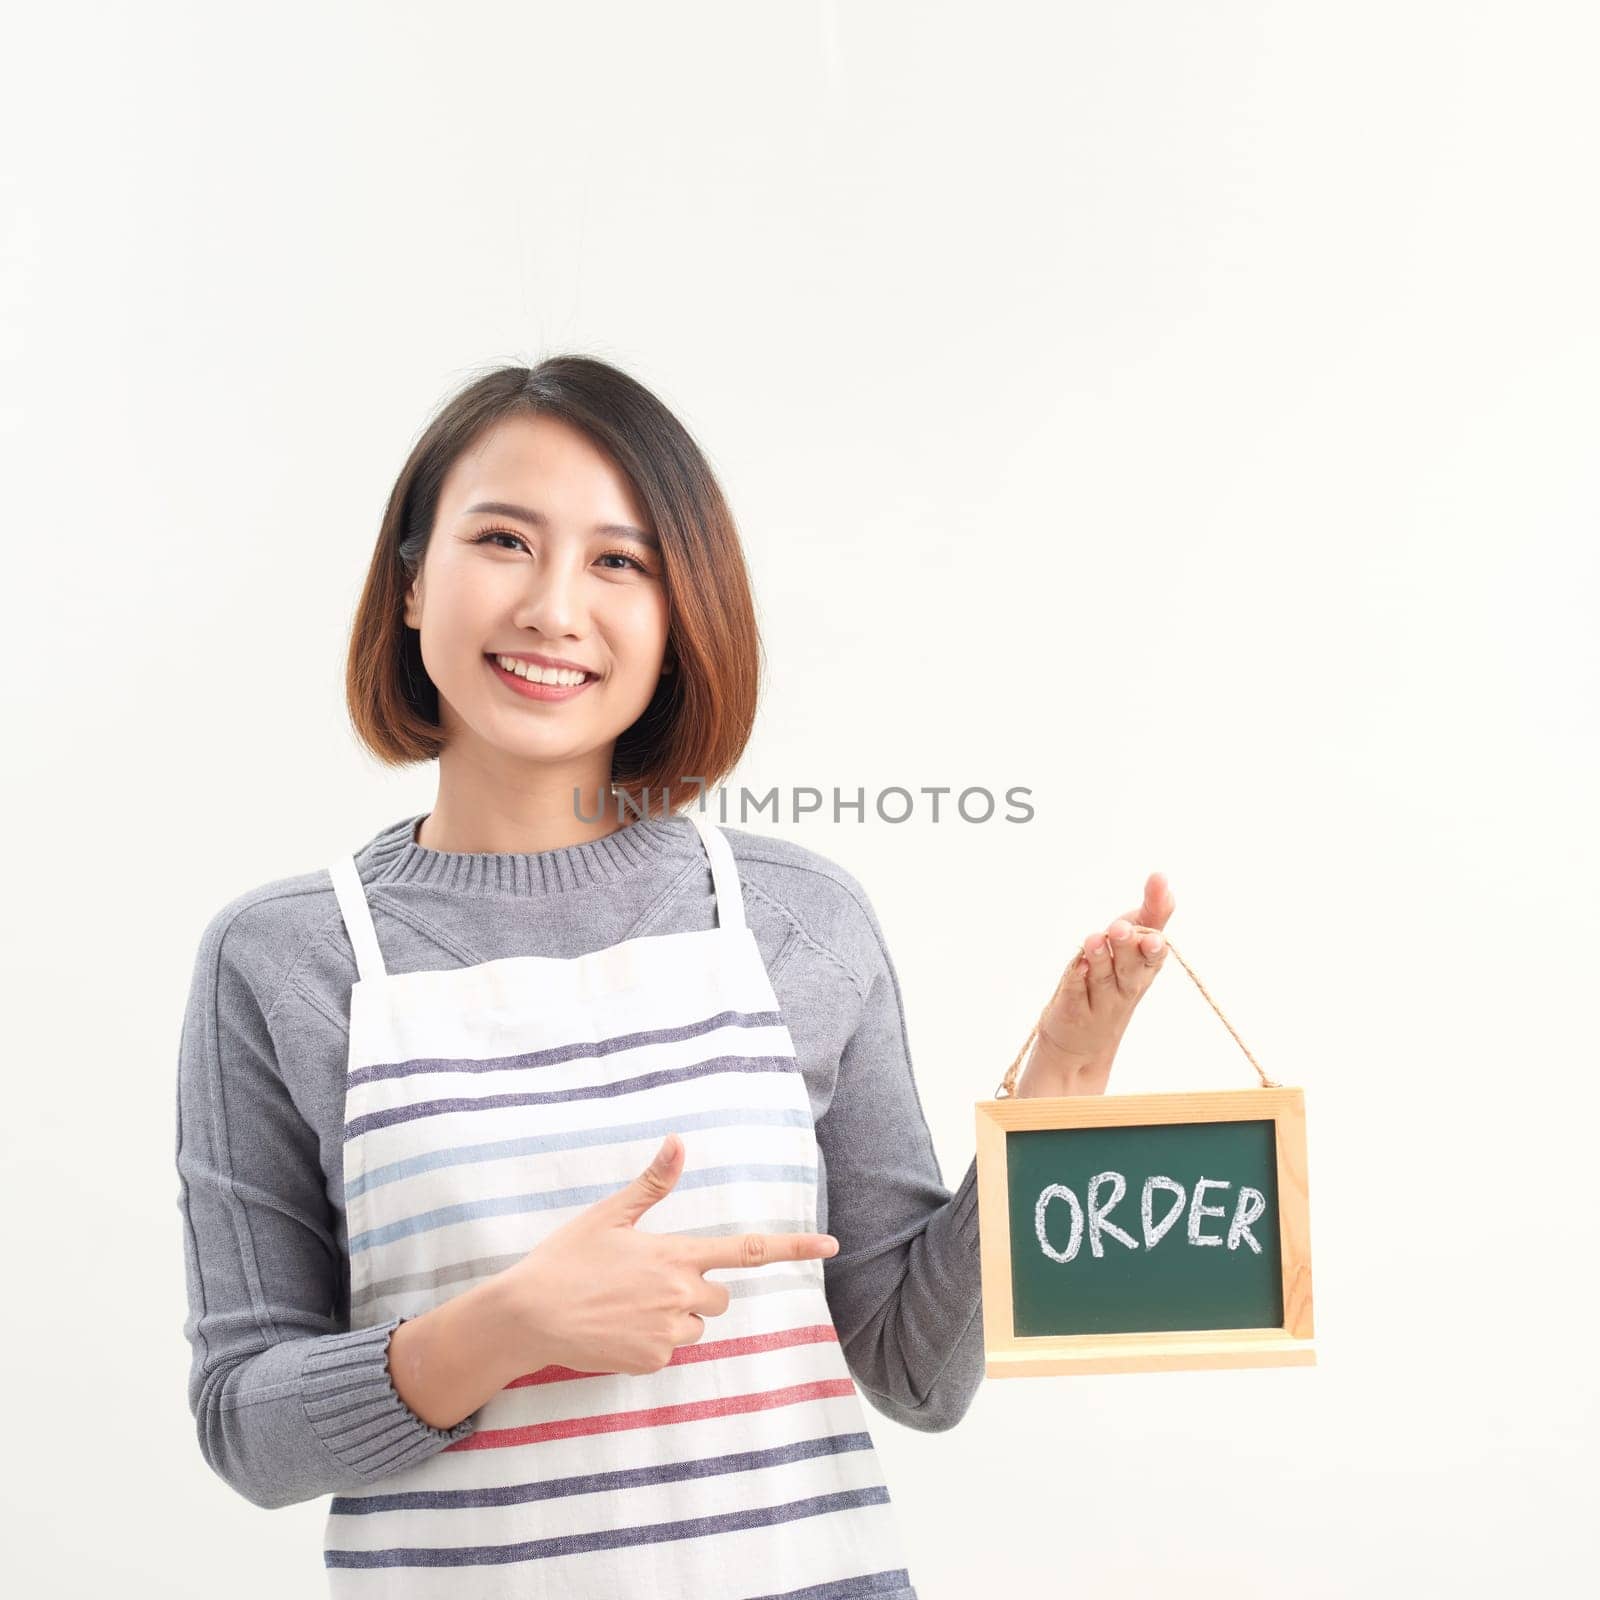 Cheerful girl holding advertising board with order word and pointing on it, white studio background